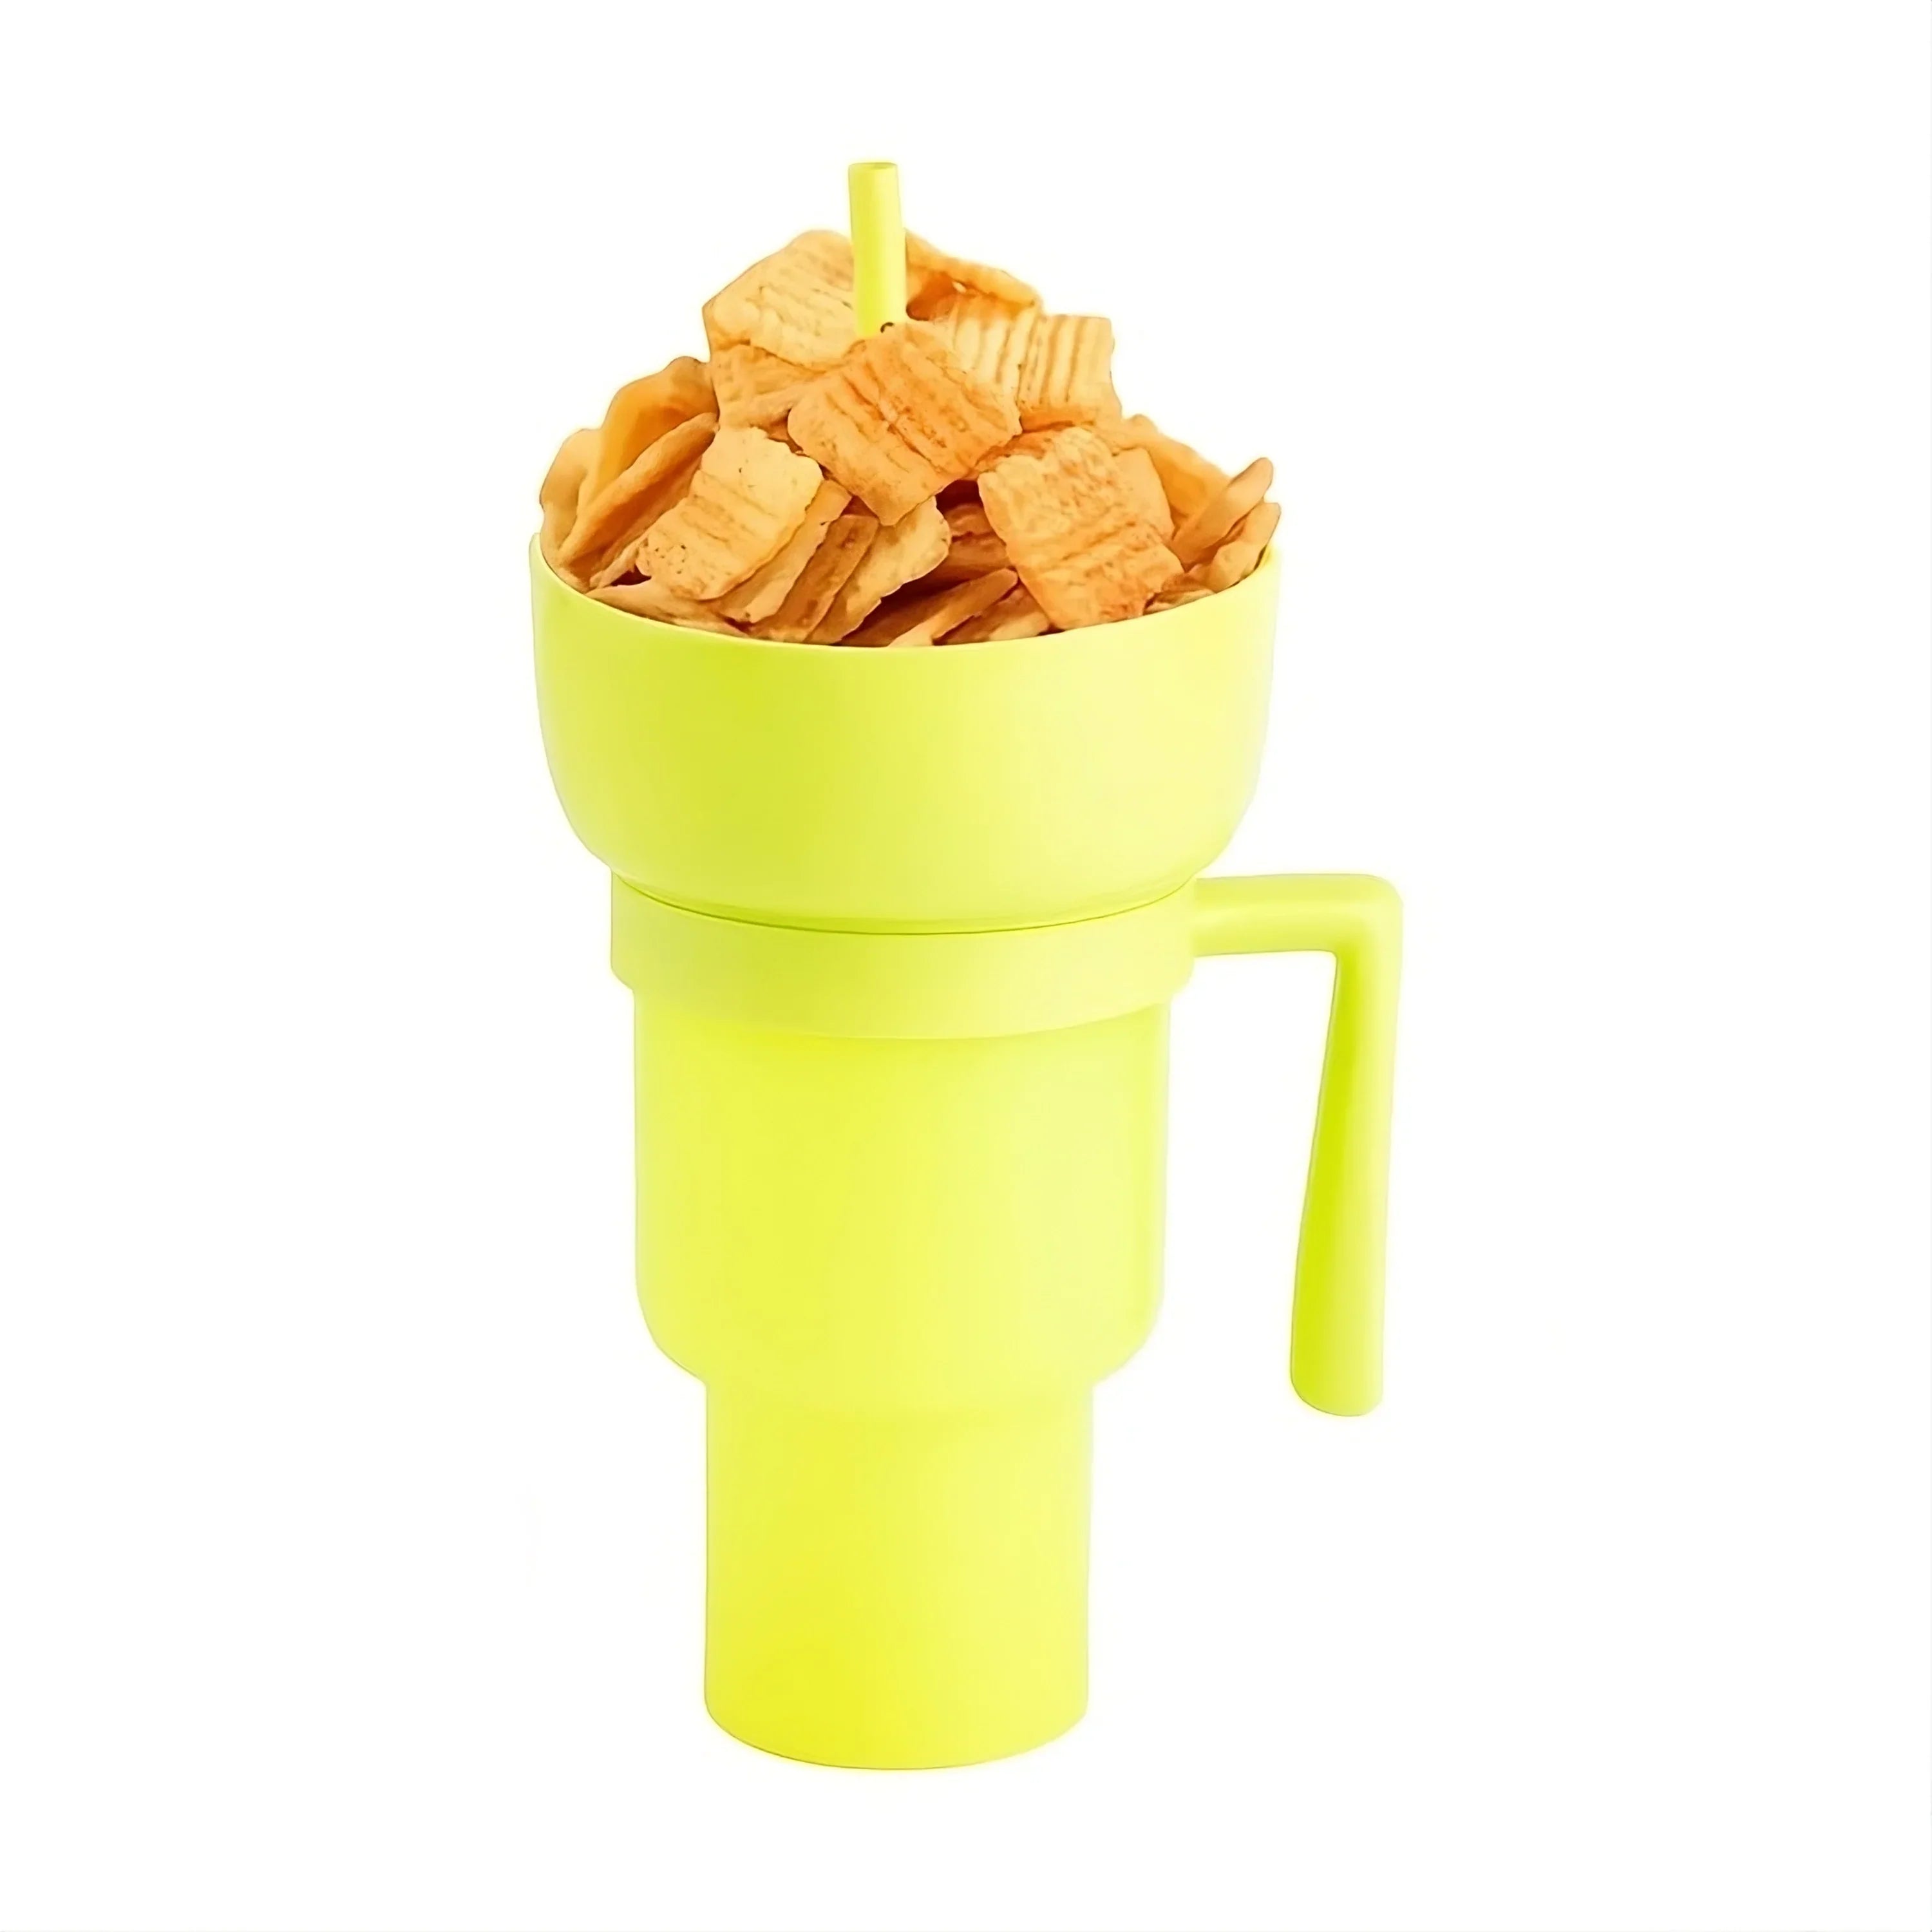 The SnackCup